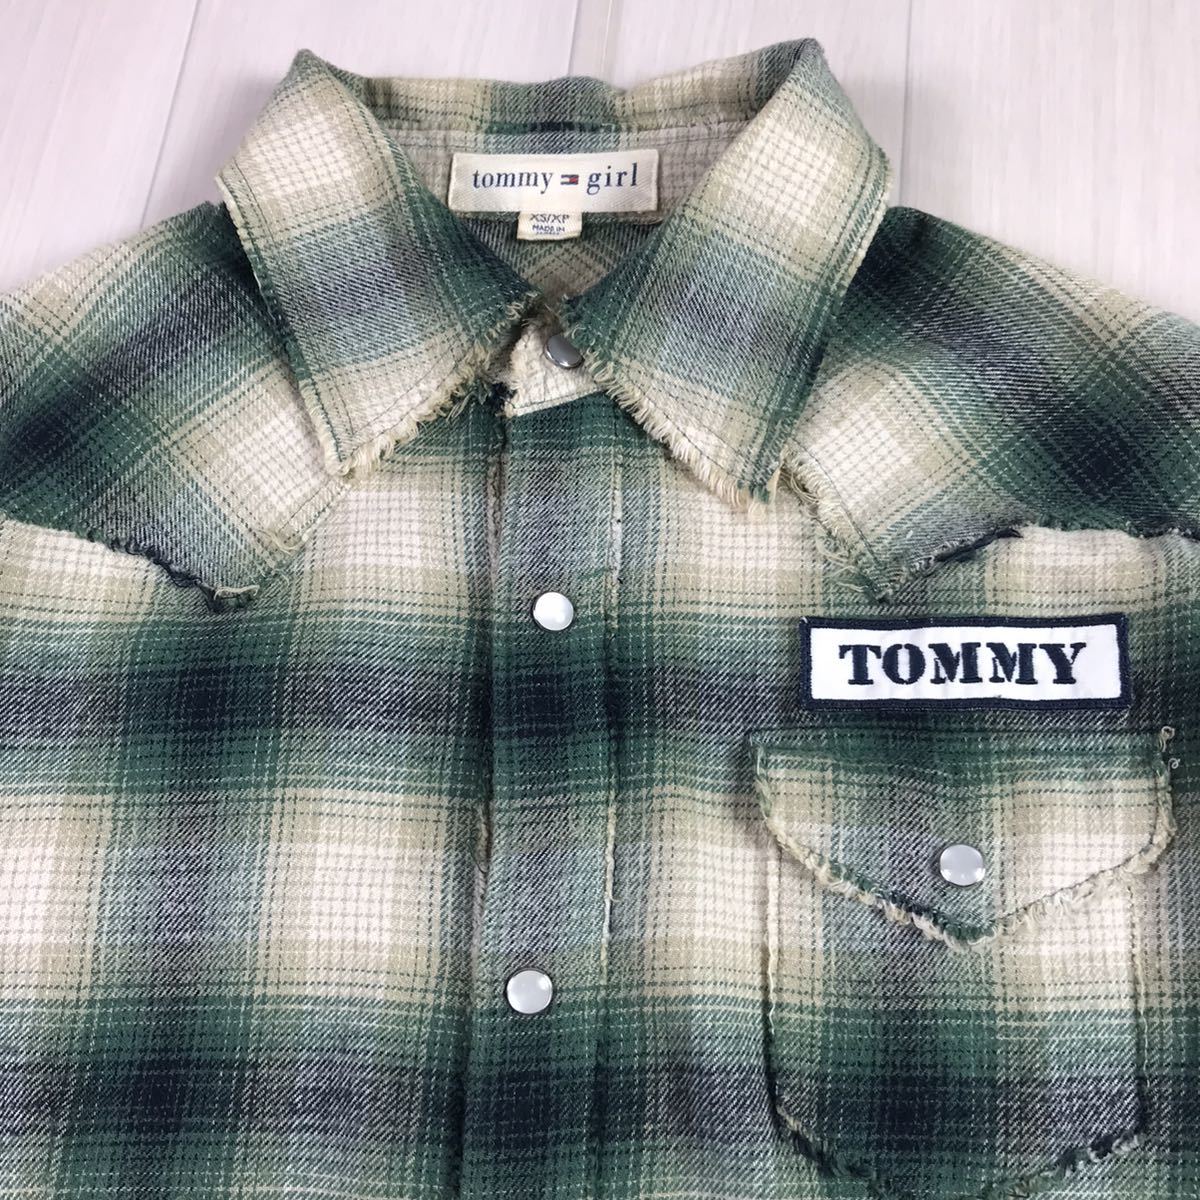 TOMMY GIRL Tommy girl long sleeve shirt flannel shirt XS/XP multicolor tartan check 